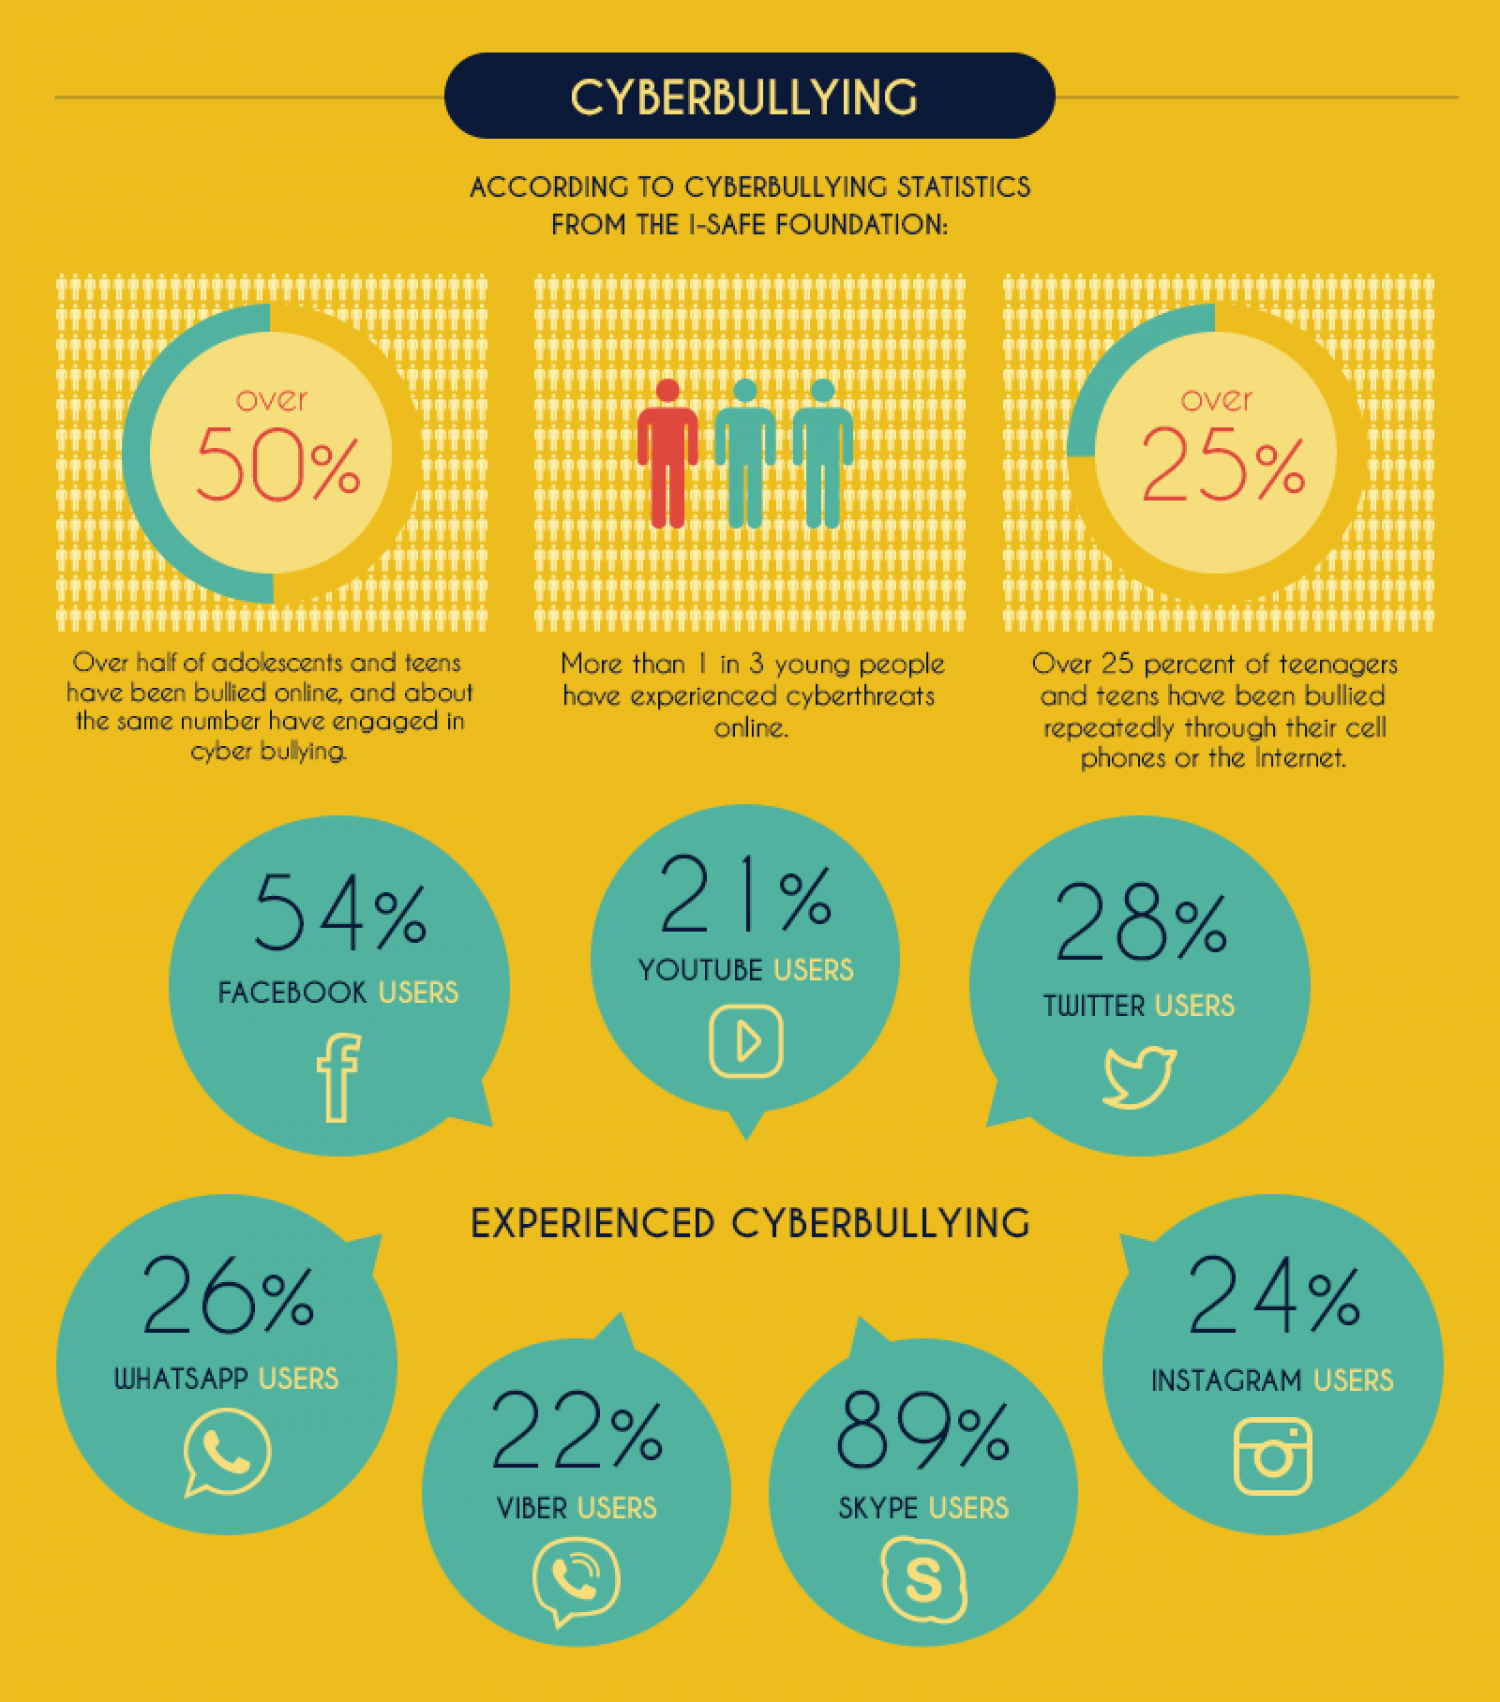 The Facts of Cyberbullying [Infographic] - ChurchMag